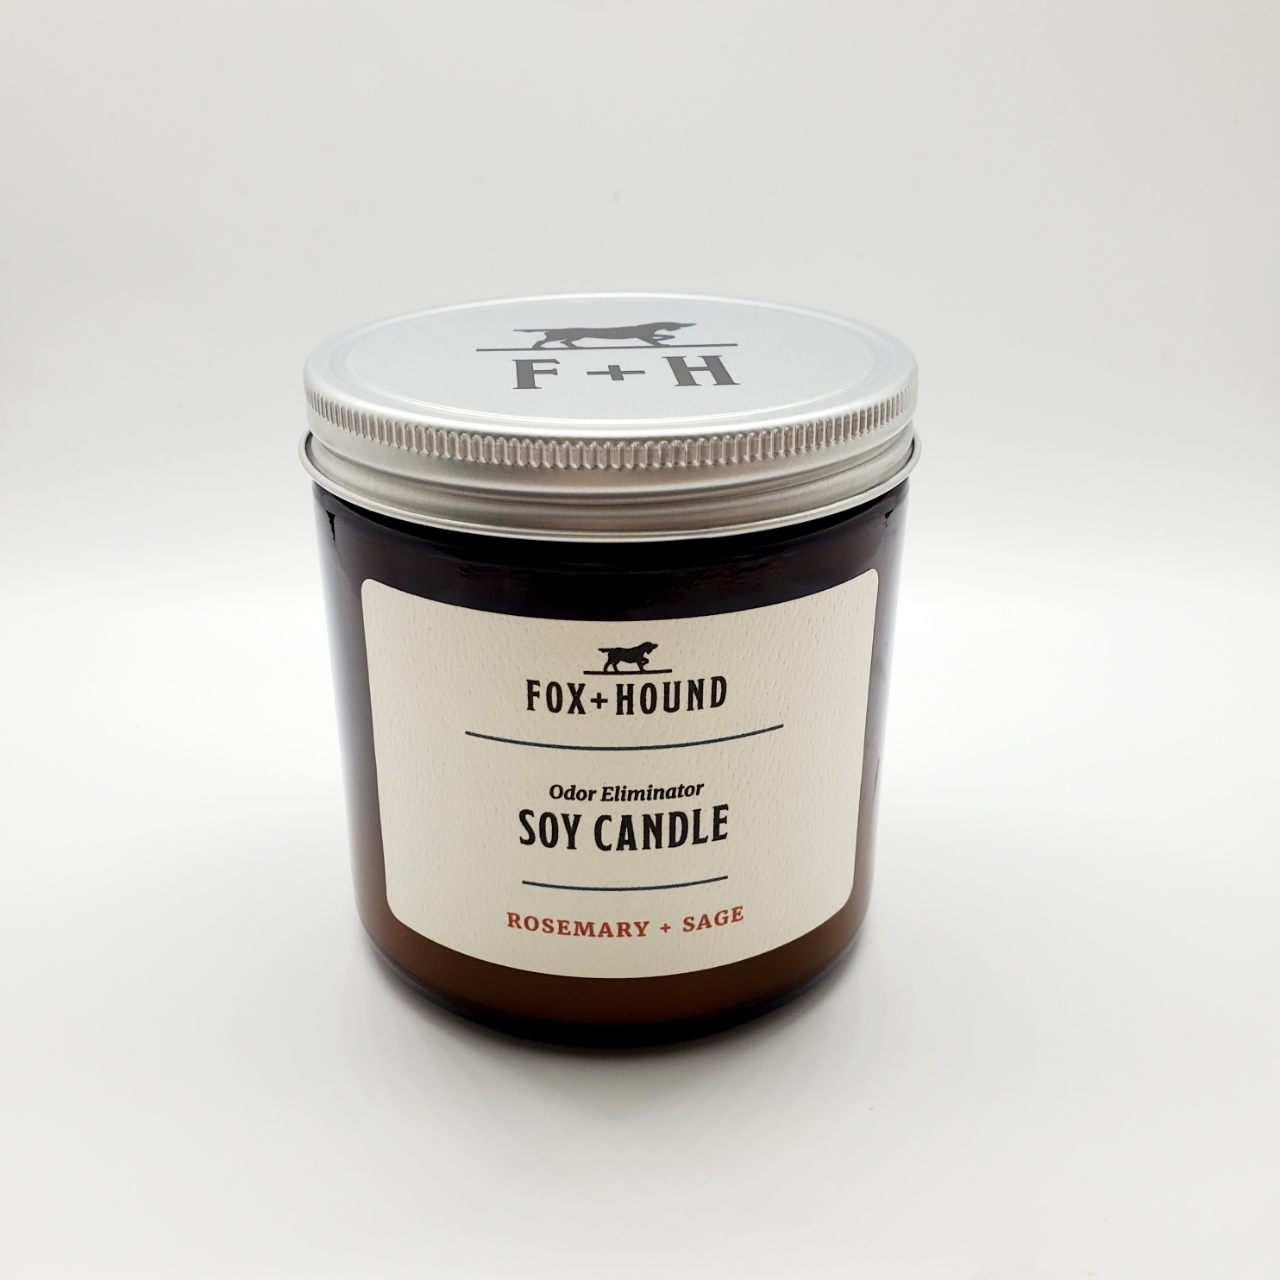 Rosemary + Sage - Odor Eliminator Soy Candle - - Fragrance - Holler Brighton - Fox and Hounds